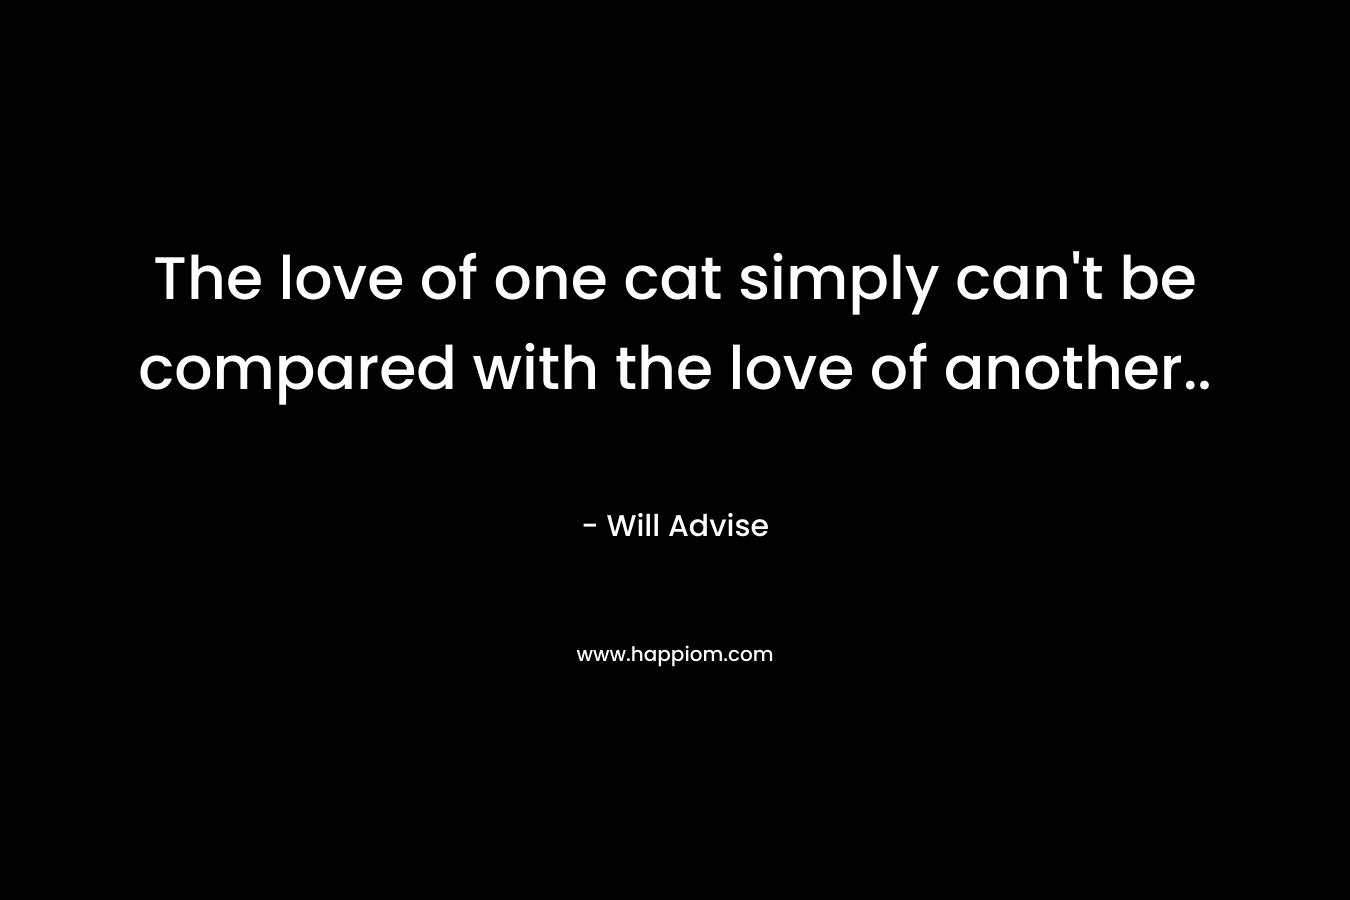 The love of one cat simply can’t be compared with the love of another.. – Will Advise